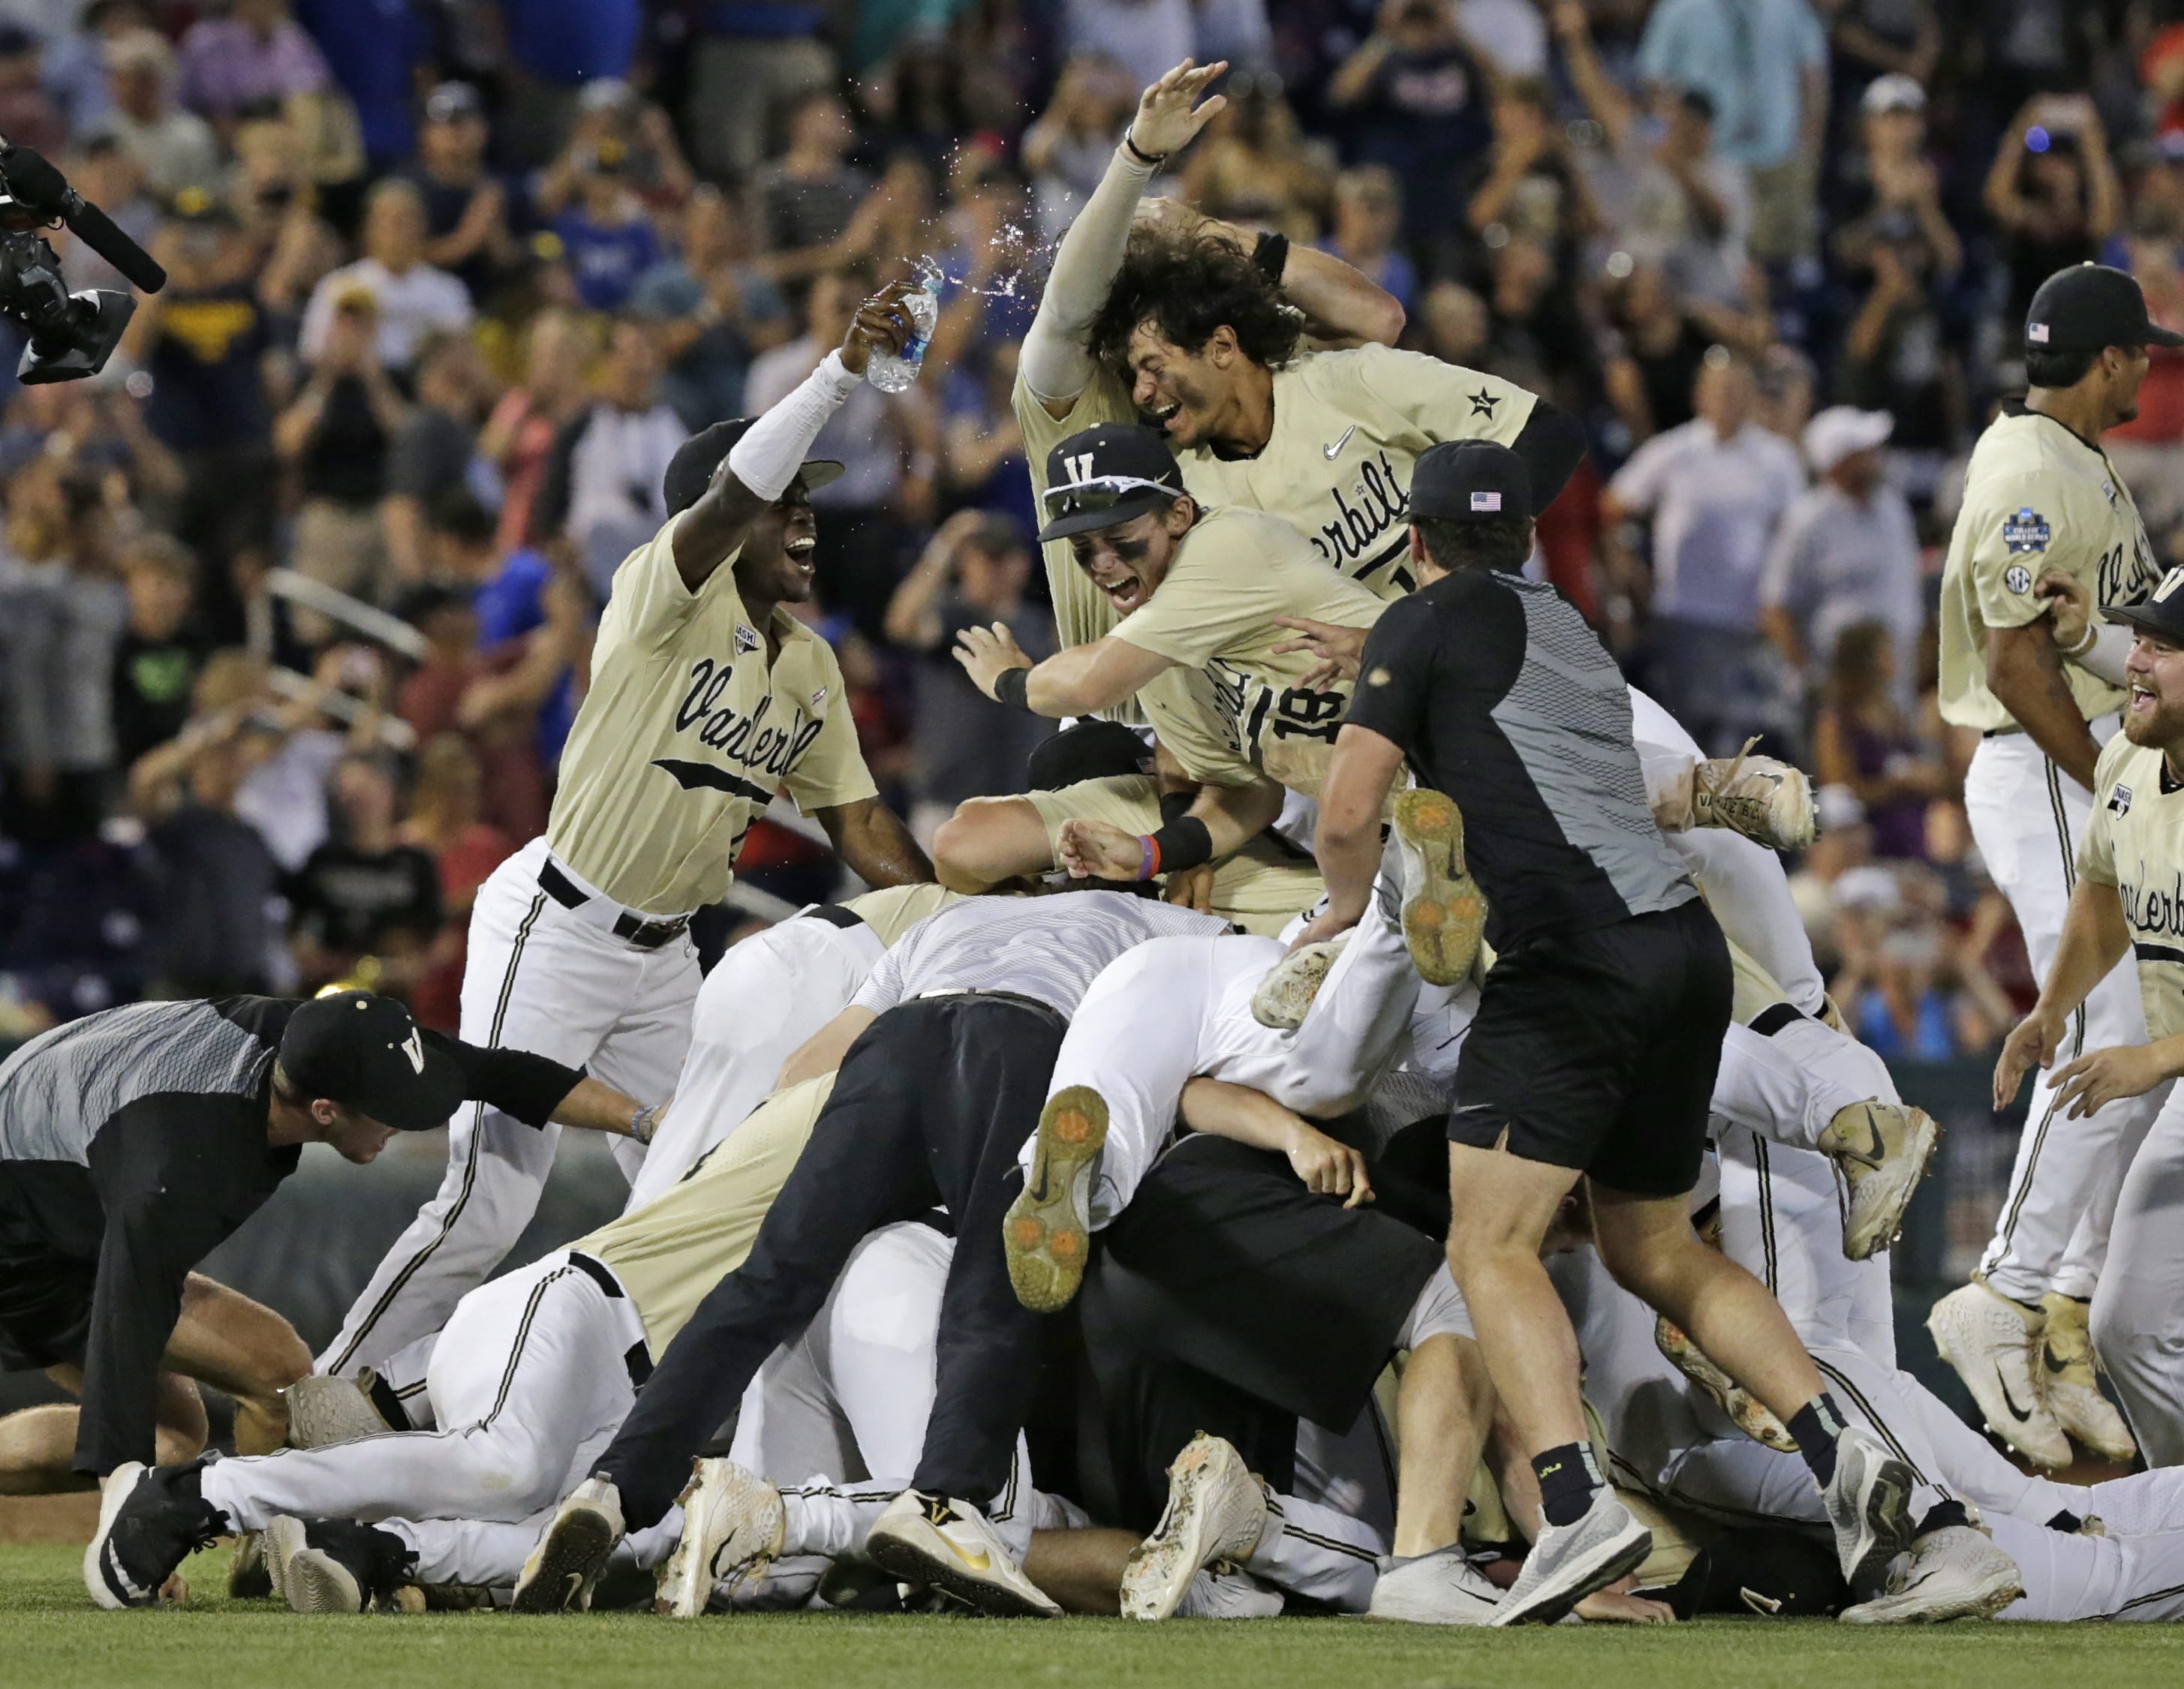 Vanderbilt players celebrate after defeating Michigan to win Game 3 of the NCAA College World Series baseball finals in Omaha, Neb., Wednesday, June 26, 2019.